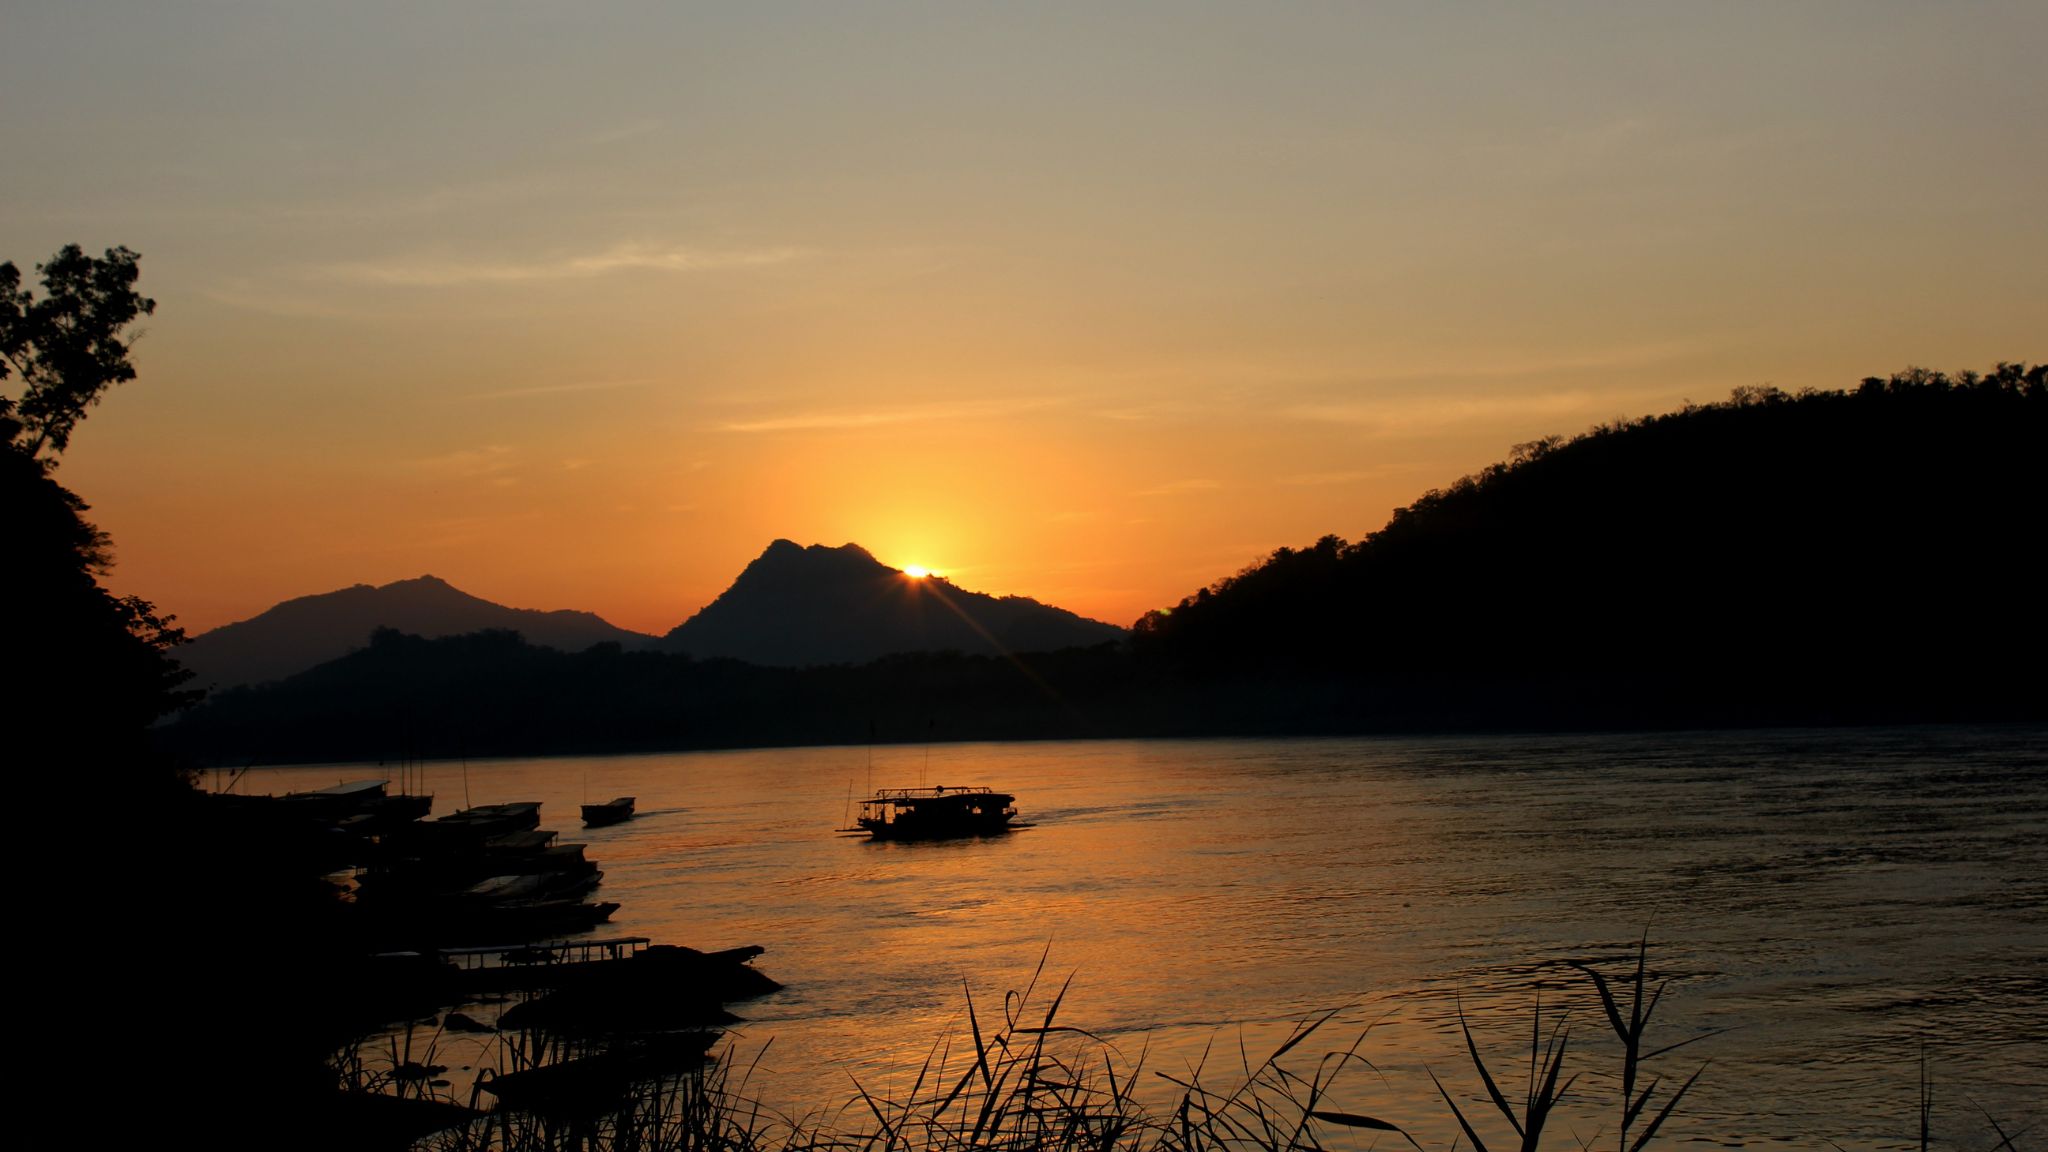 Day 2 Admire The Stunning Sunset On Mekong